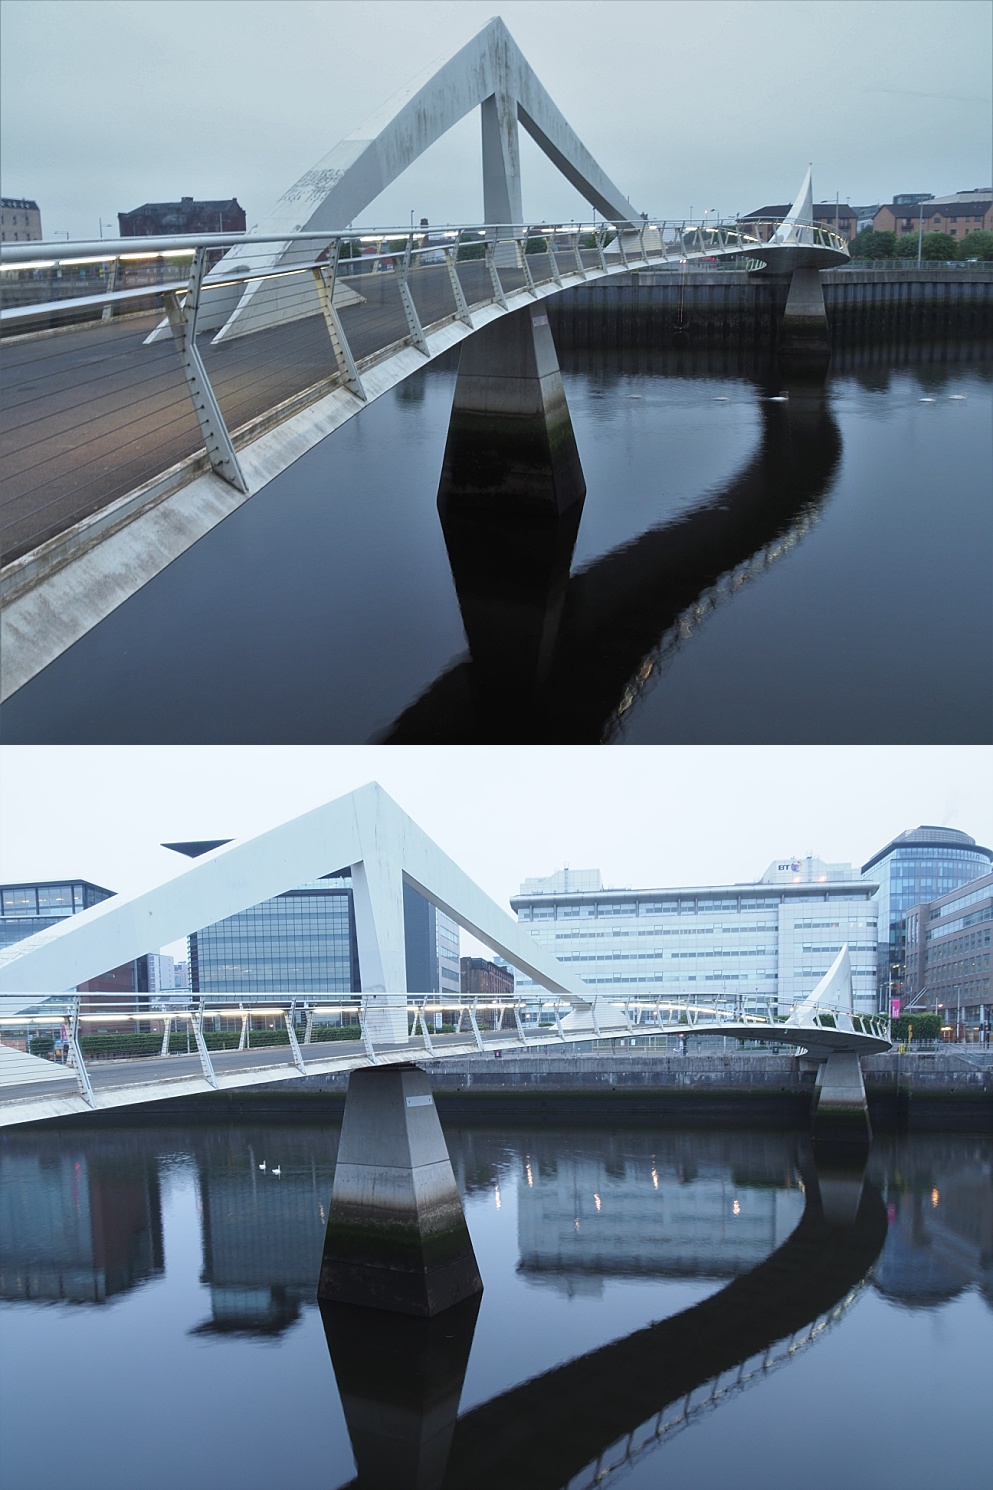 Early morning views of the pedestrian bridge across the River Clyde, from both ends.